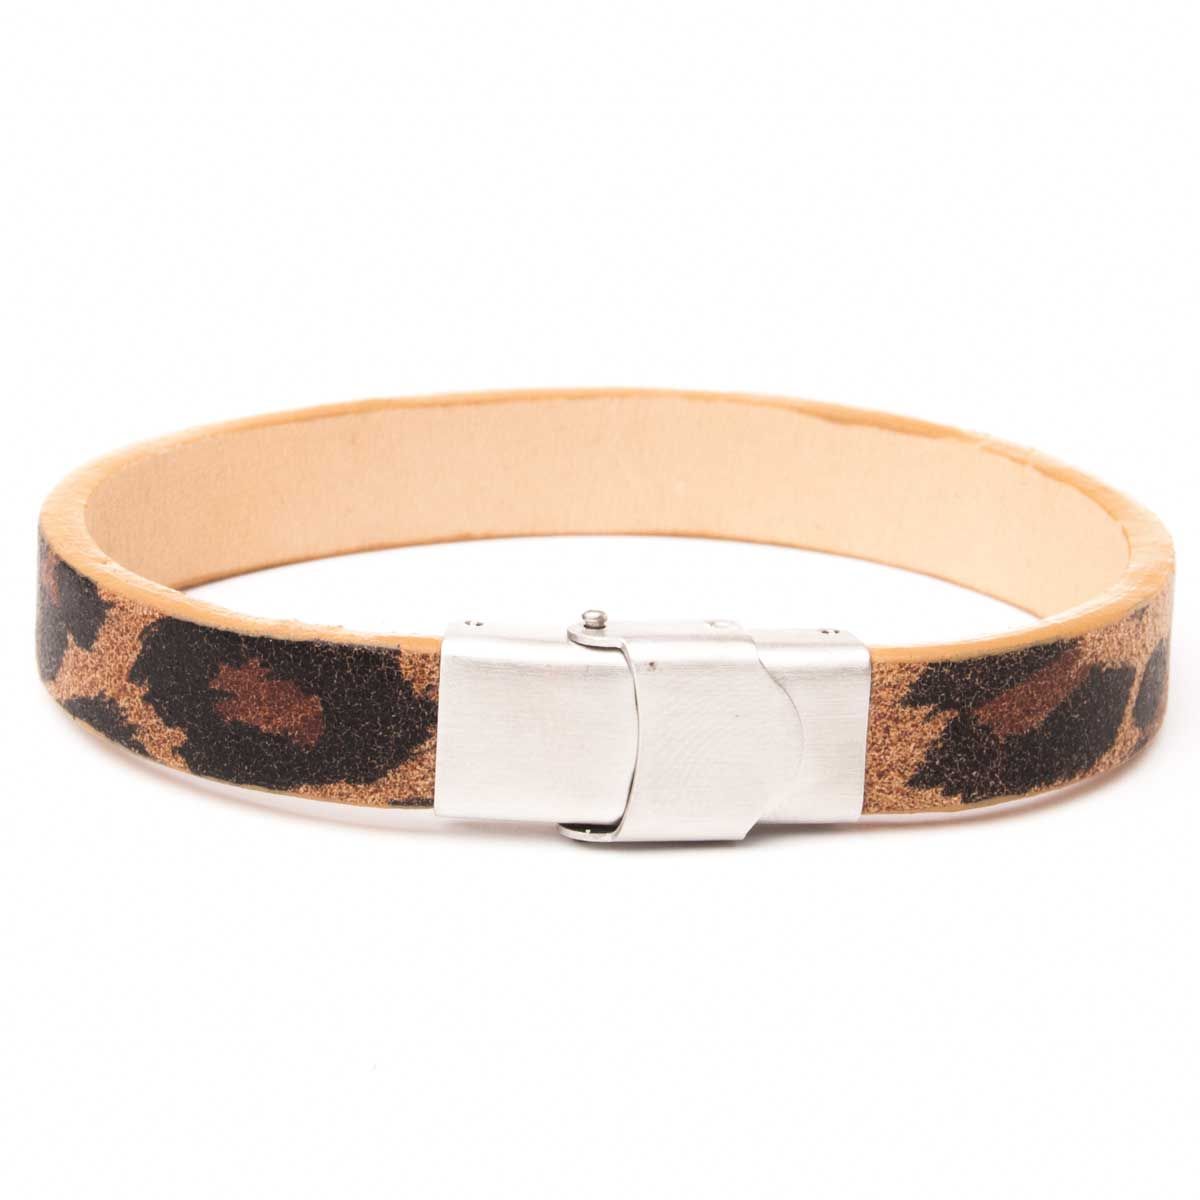 Original natural skin bracelet made of artisanally ideal for women and women. Handmade and with stainless stainless steel closure. Made in Spain. The width is 1 cm and the Standard length of 20 cm. It can be easily adapted home to the measure of each wrist thanks to its manual opening closure.